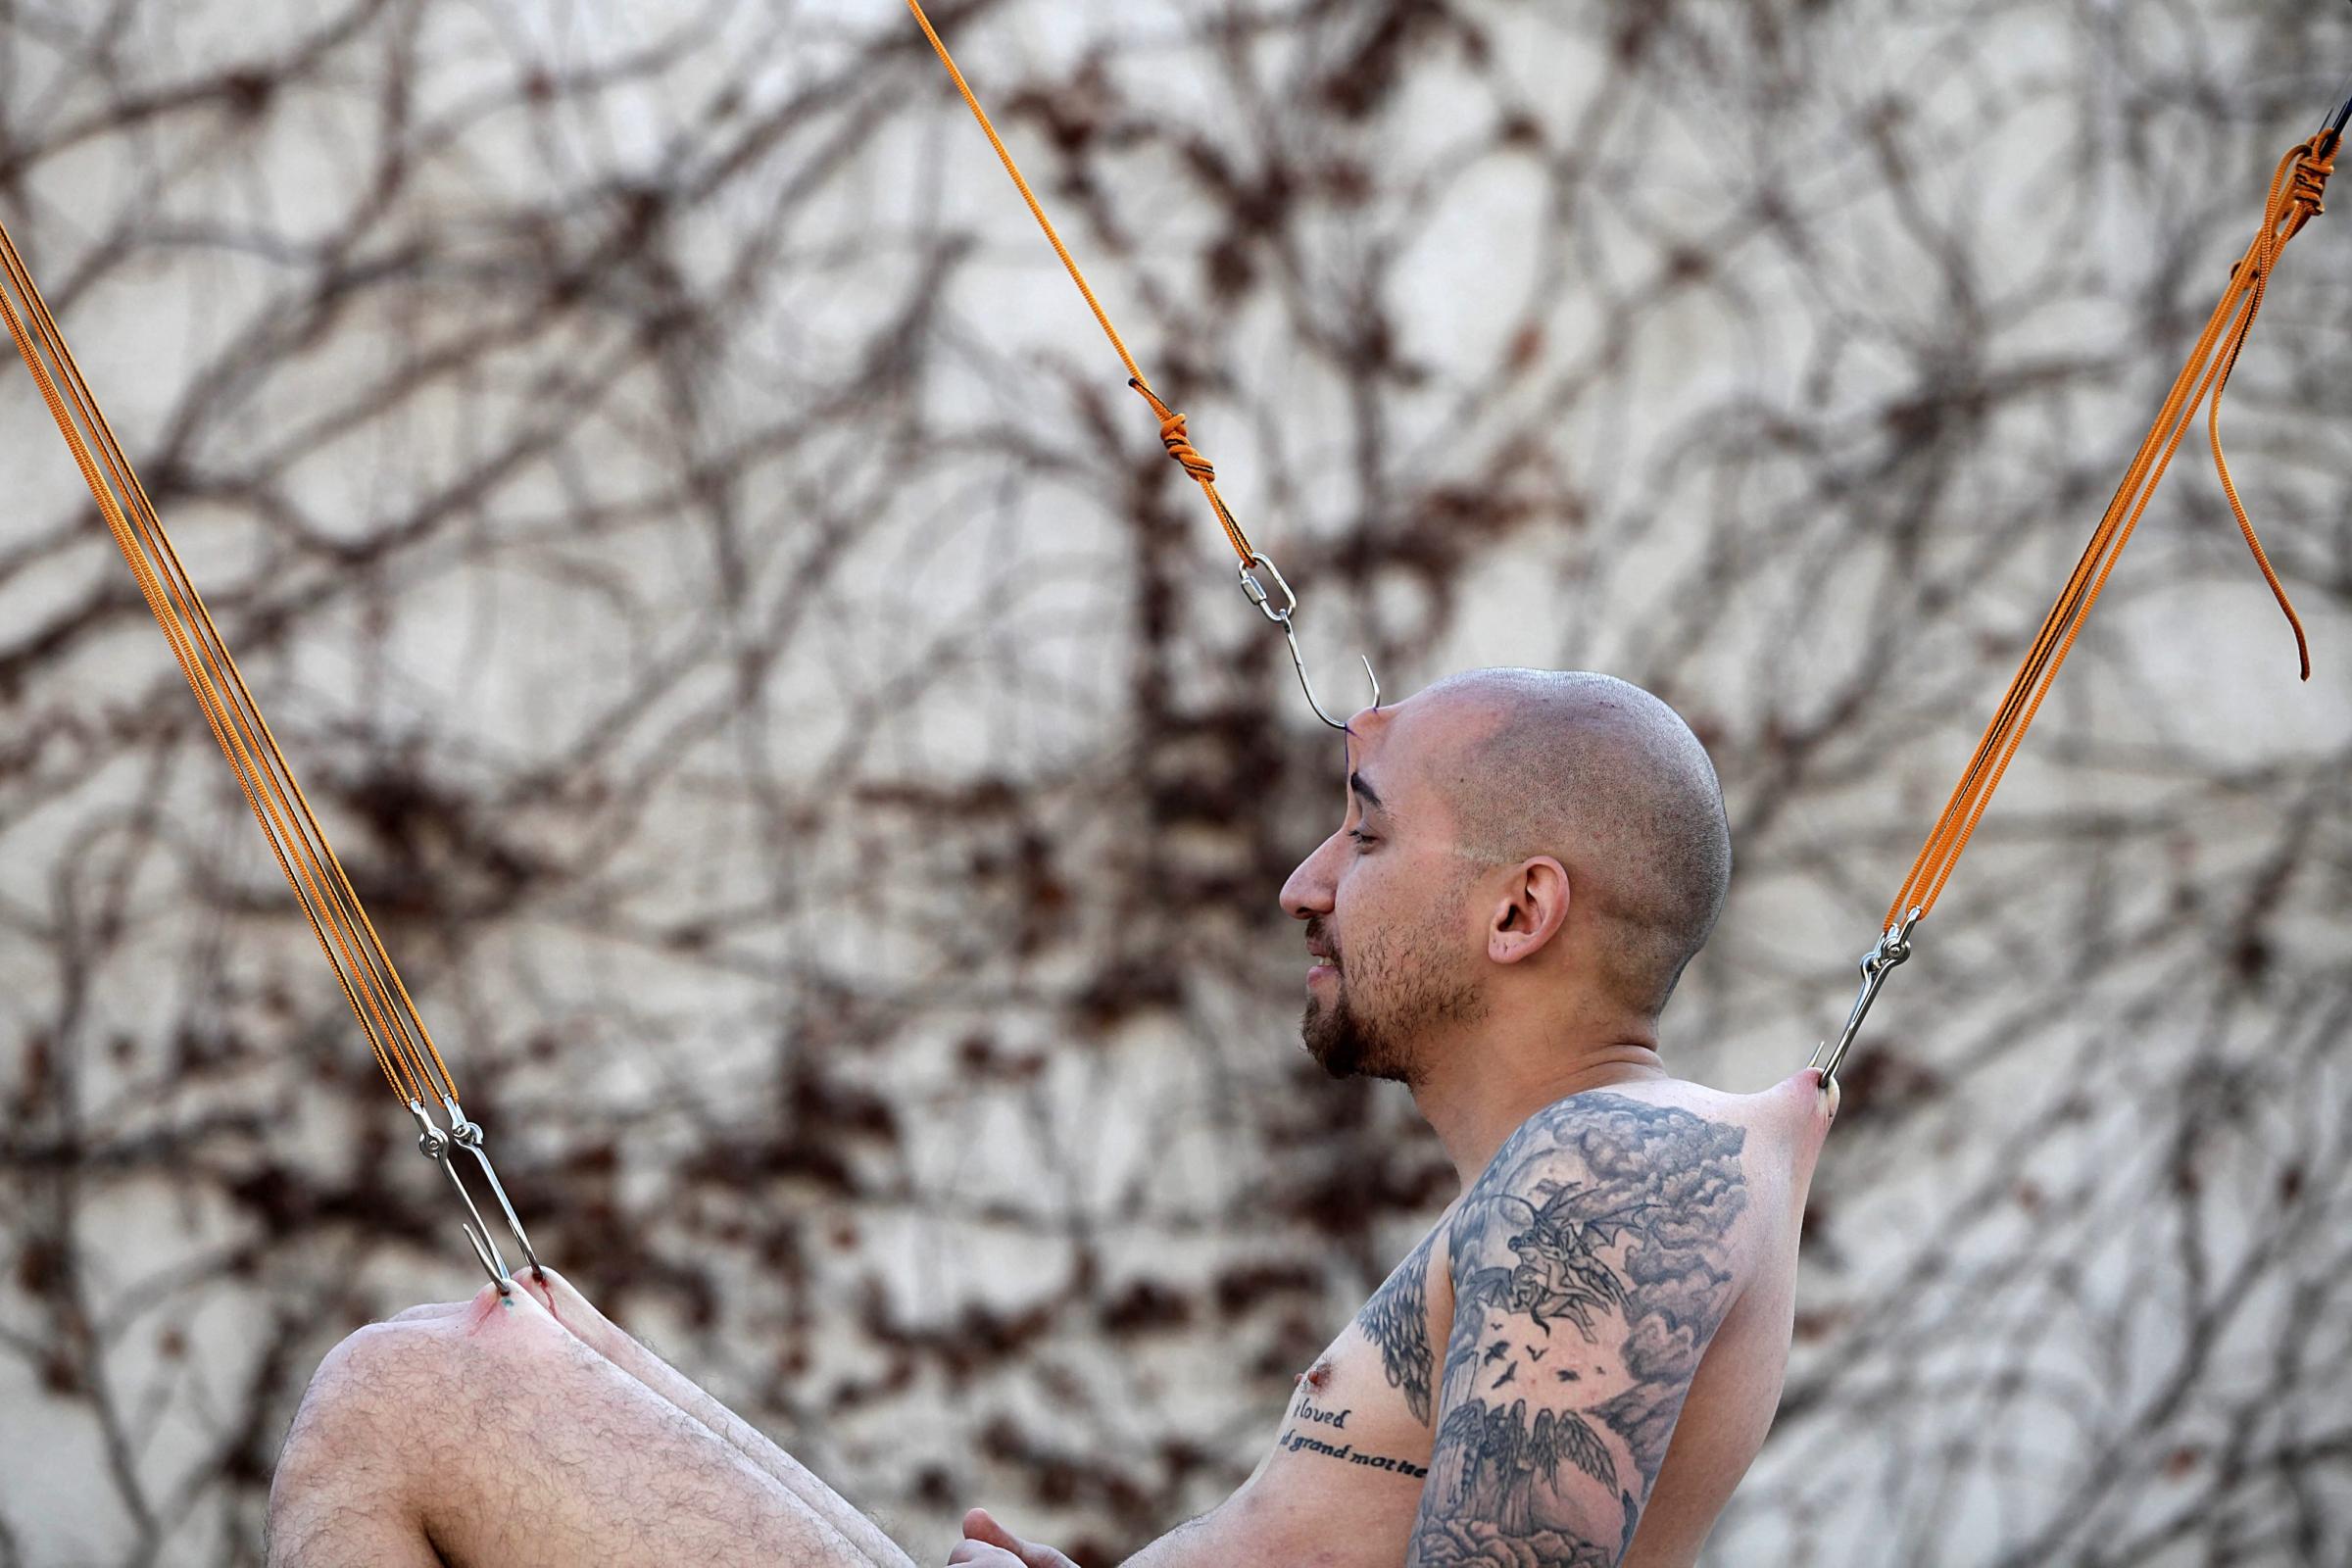 An Israeli hanging on hooks performs the Suspension (body modification) during the annual Israel Tattoo Convention in Tel Aviv, Israel, Feb. 8, 2014. The event took place for the second time in Israel featuring the best tattoo artists of the country.